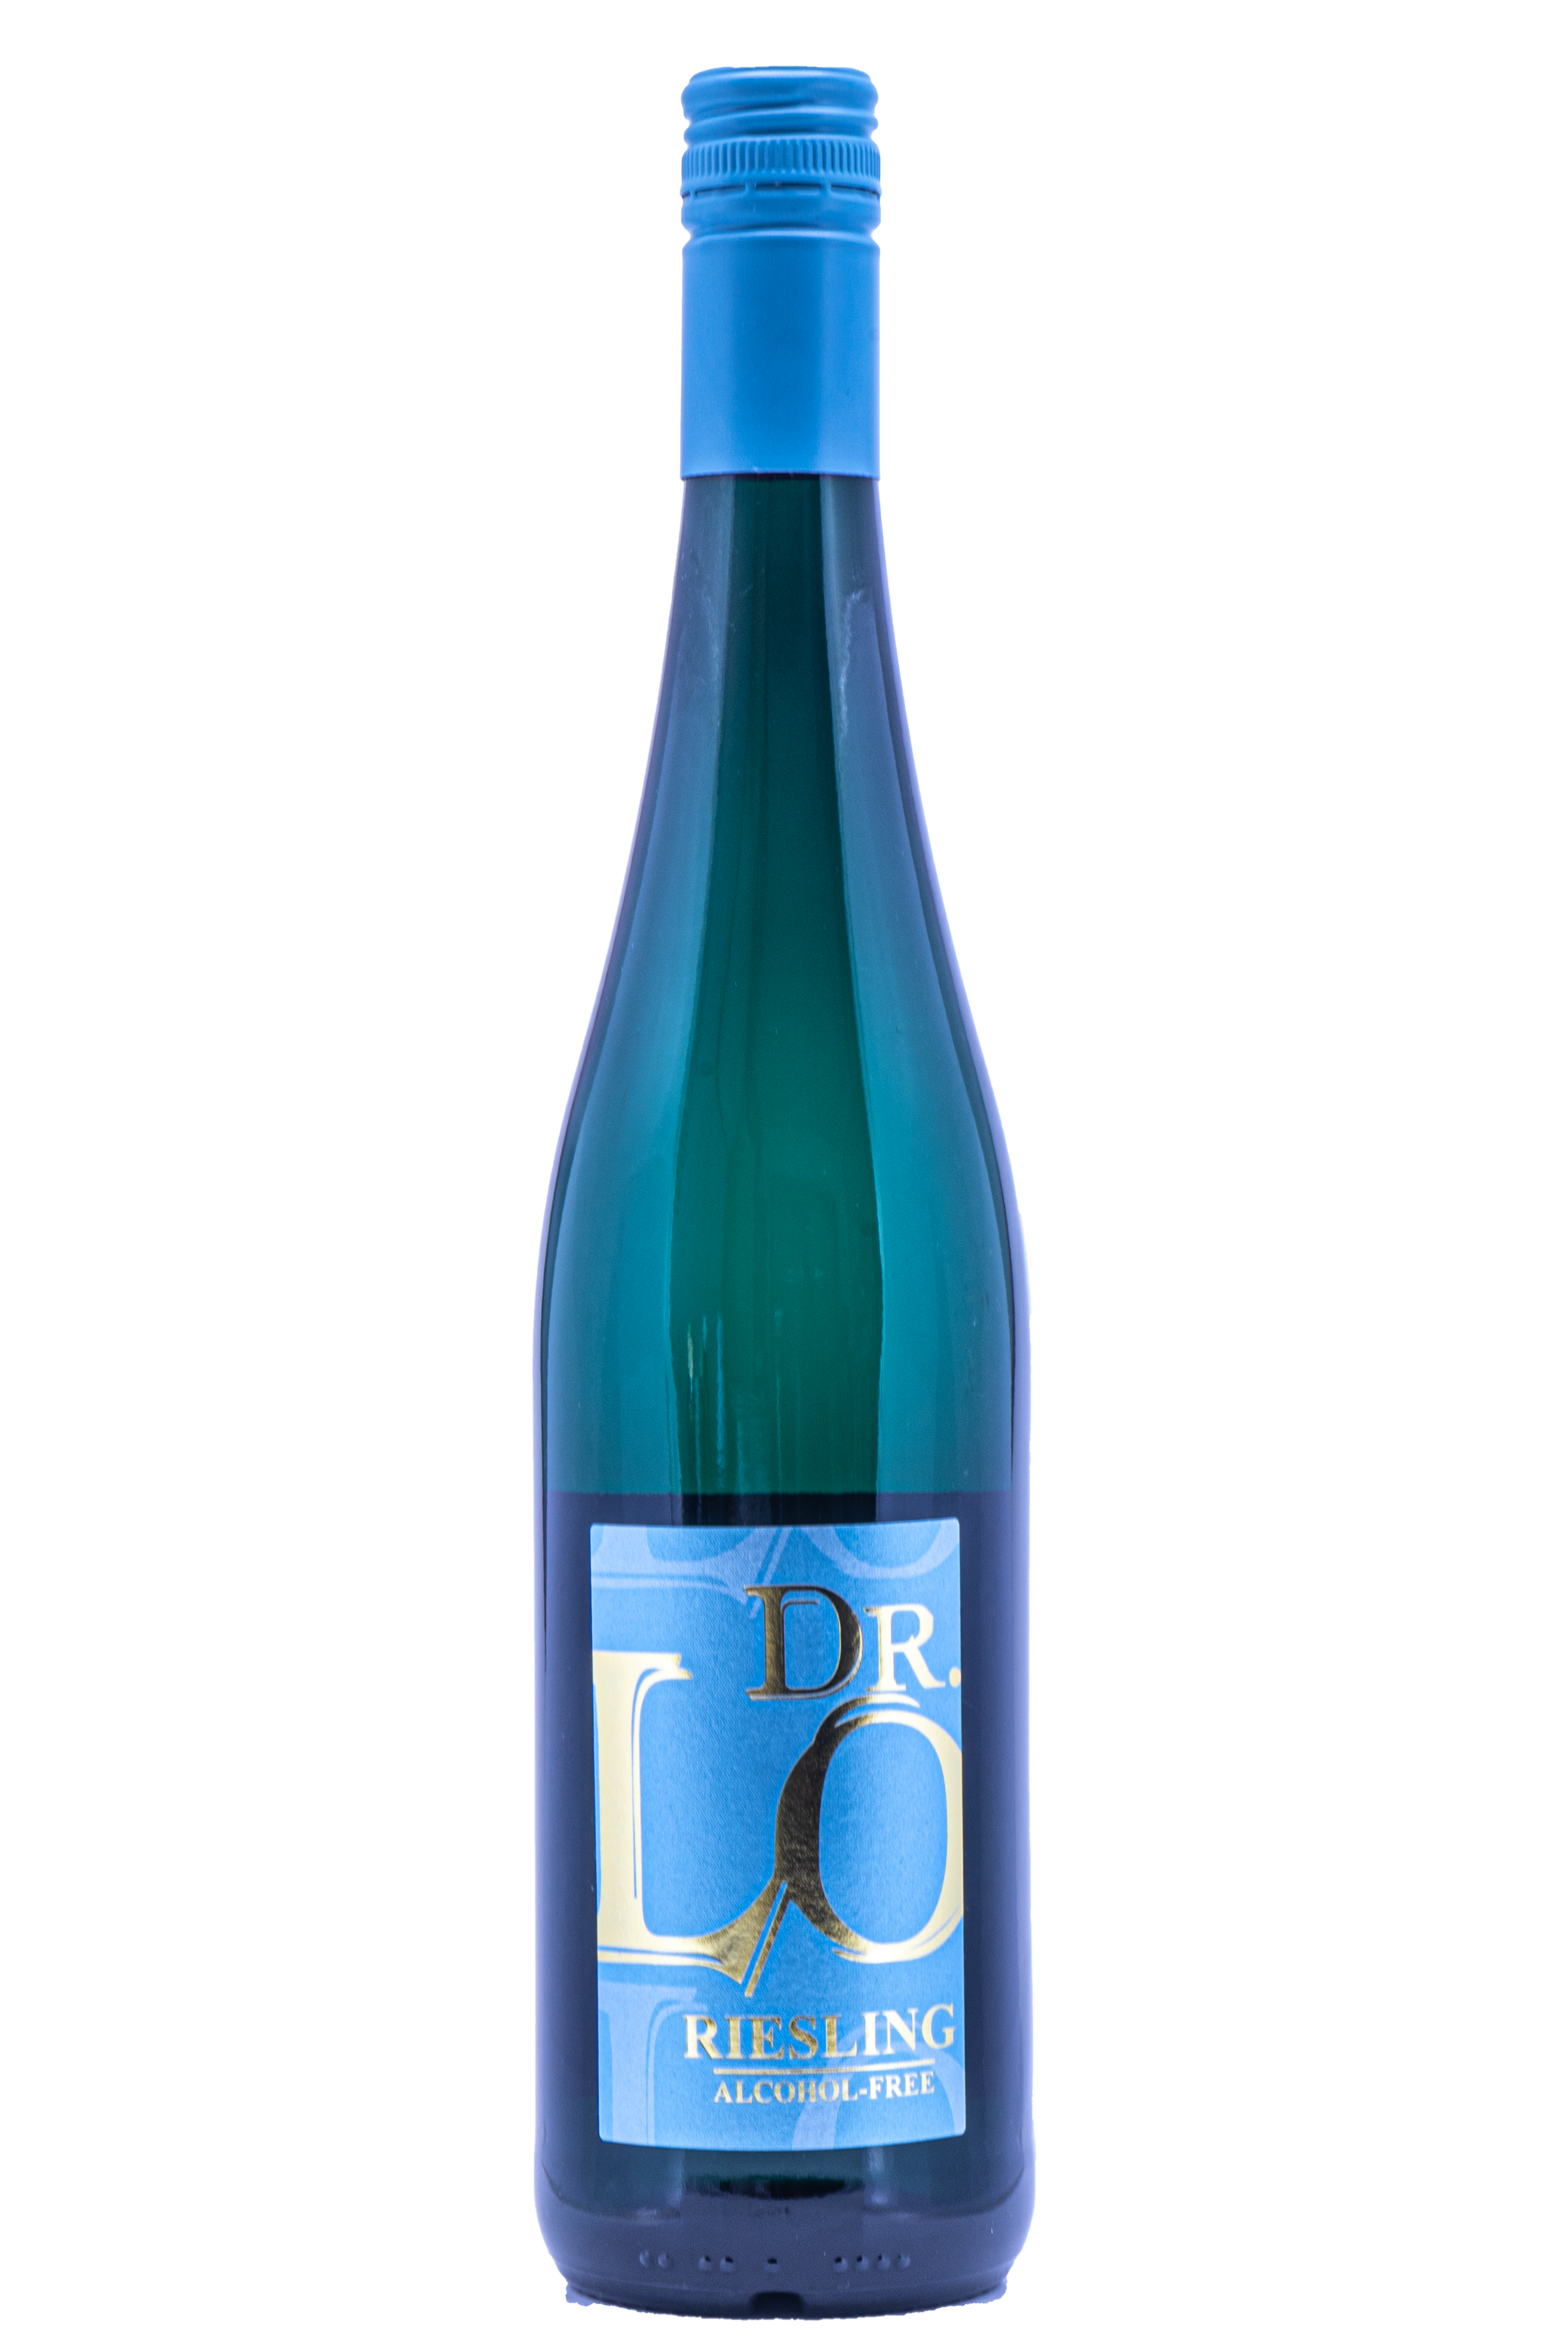 2020 DR. LO Riesling Alkoholfrei 